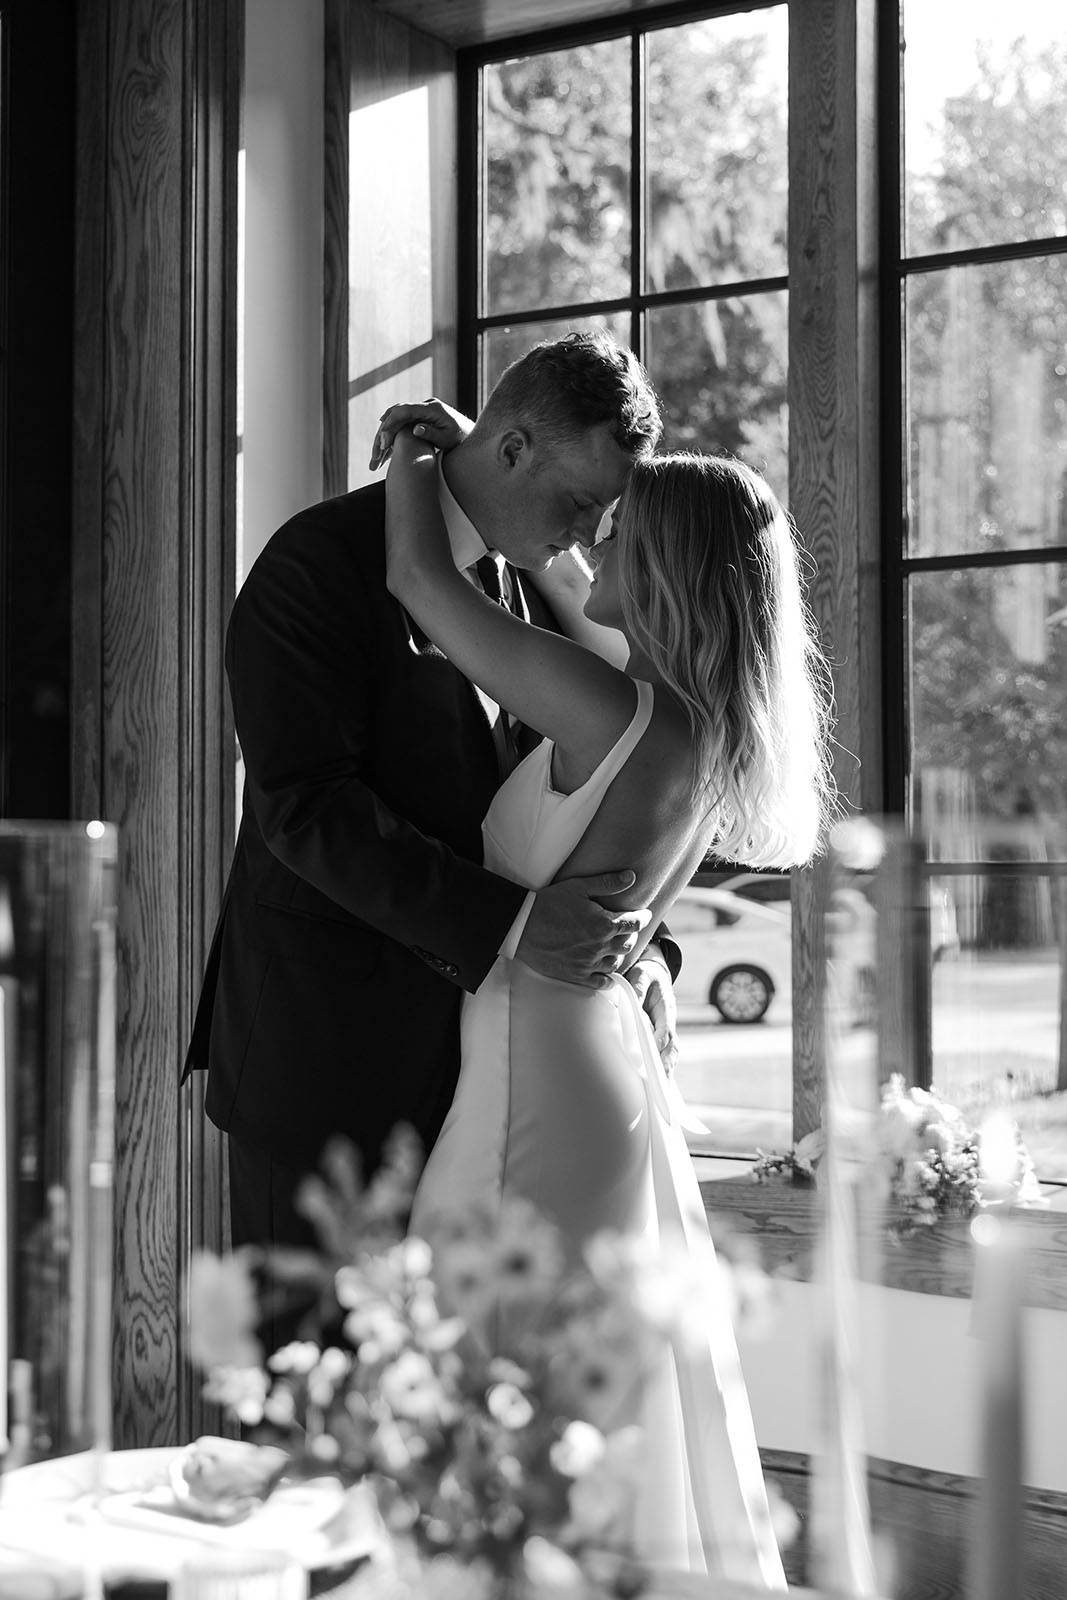 Captivating black and white photograph capturing the bride and groom gracefully dancing, immersed in the timeless magic of their special moment.